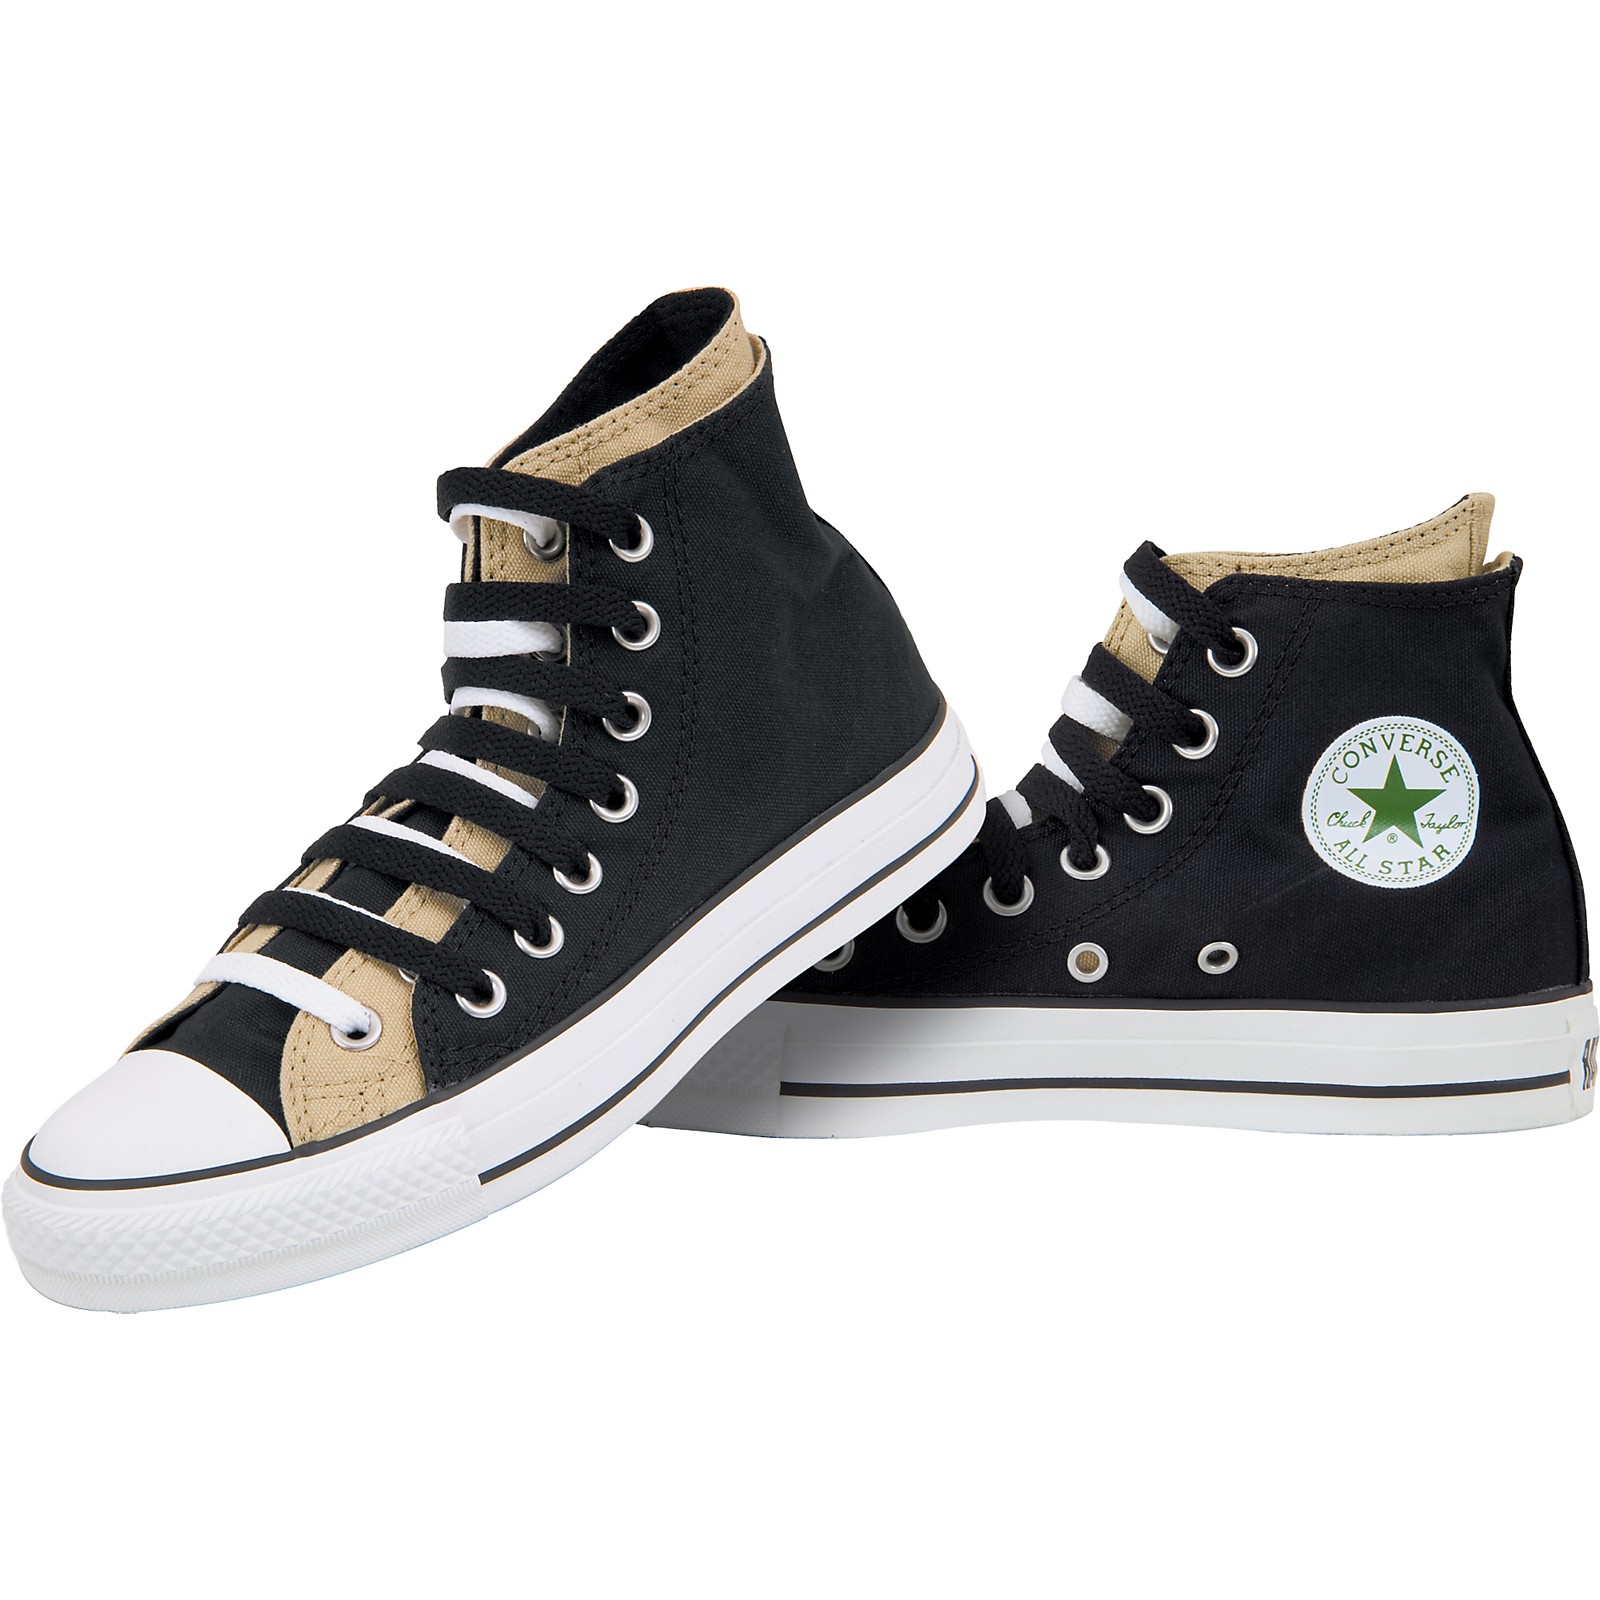 Converse Double-Upper Chuck Taylor All Star Hi-Top Shoes | Musician's Friend